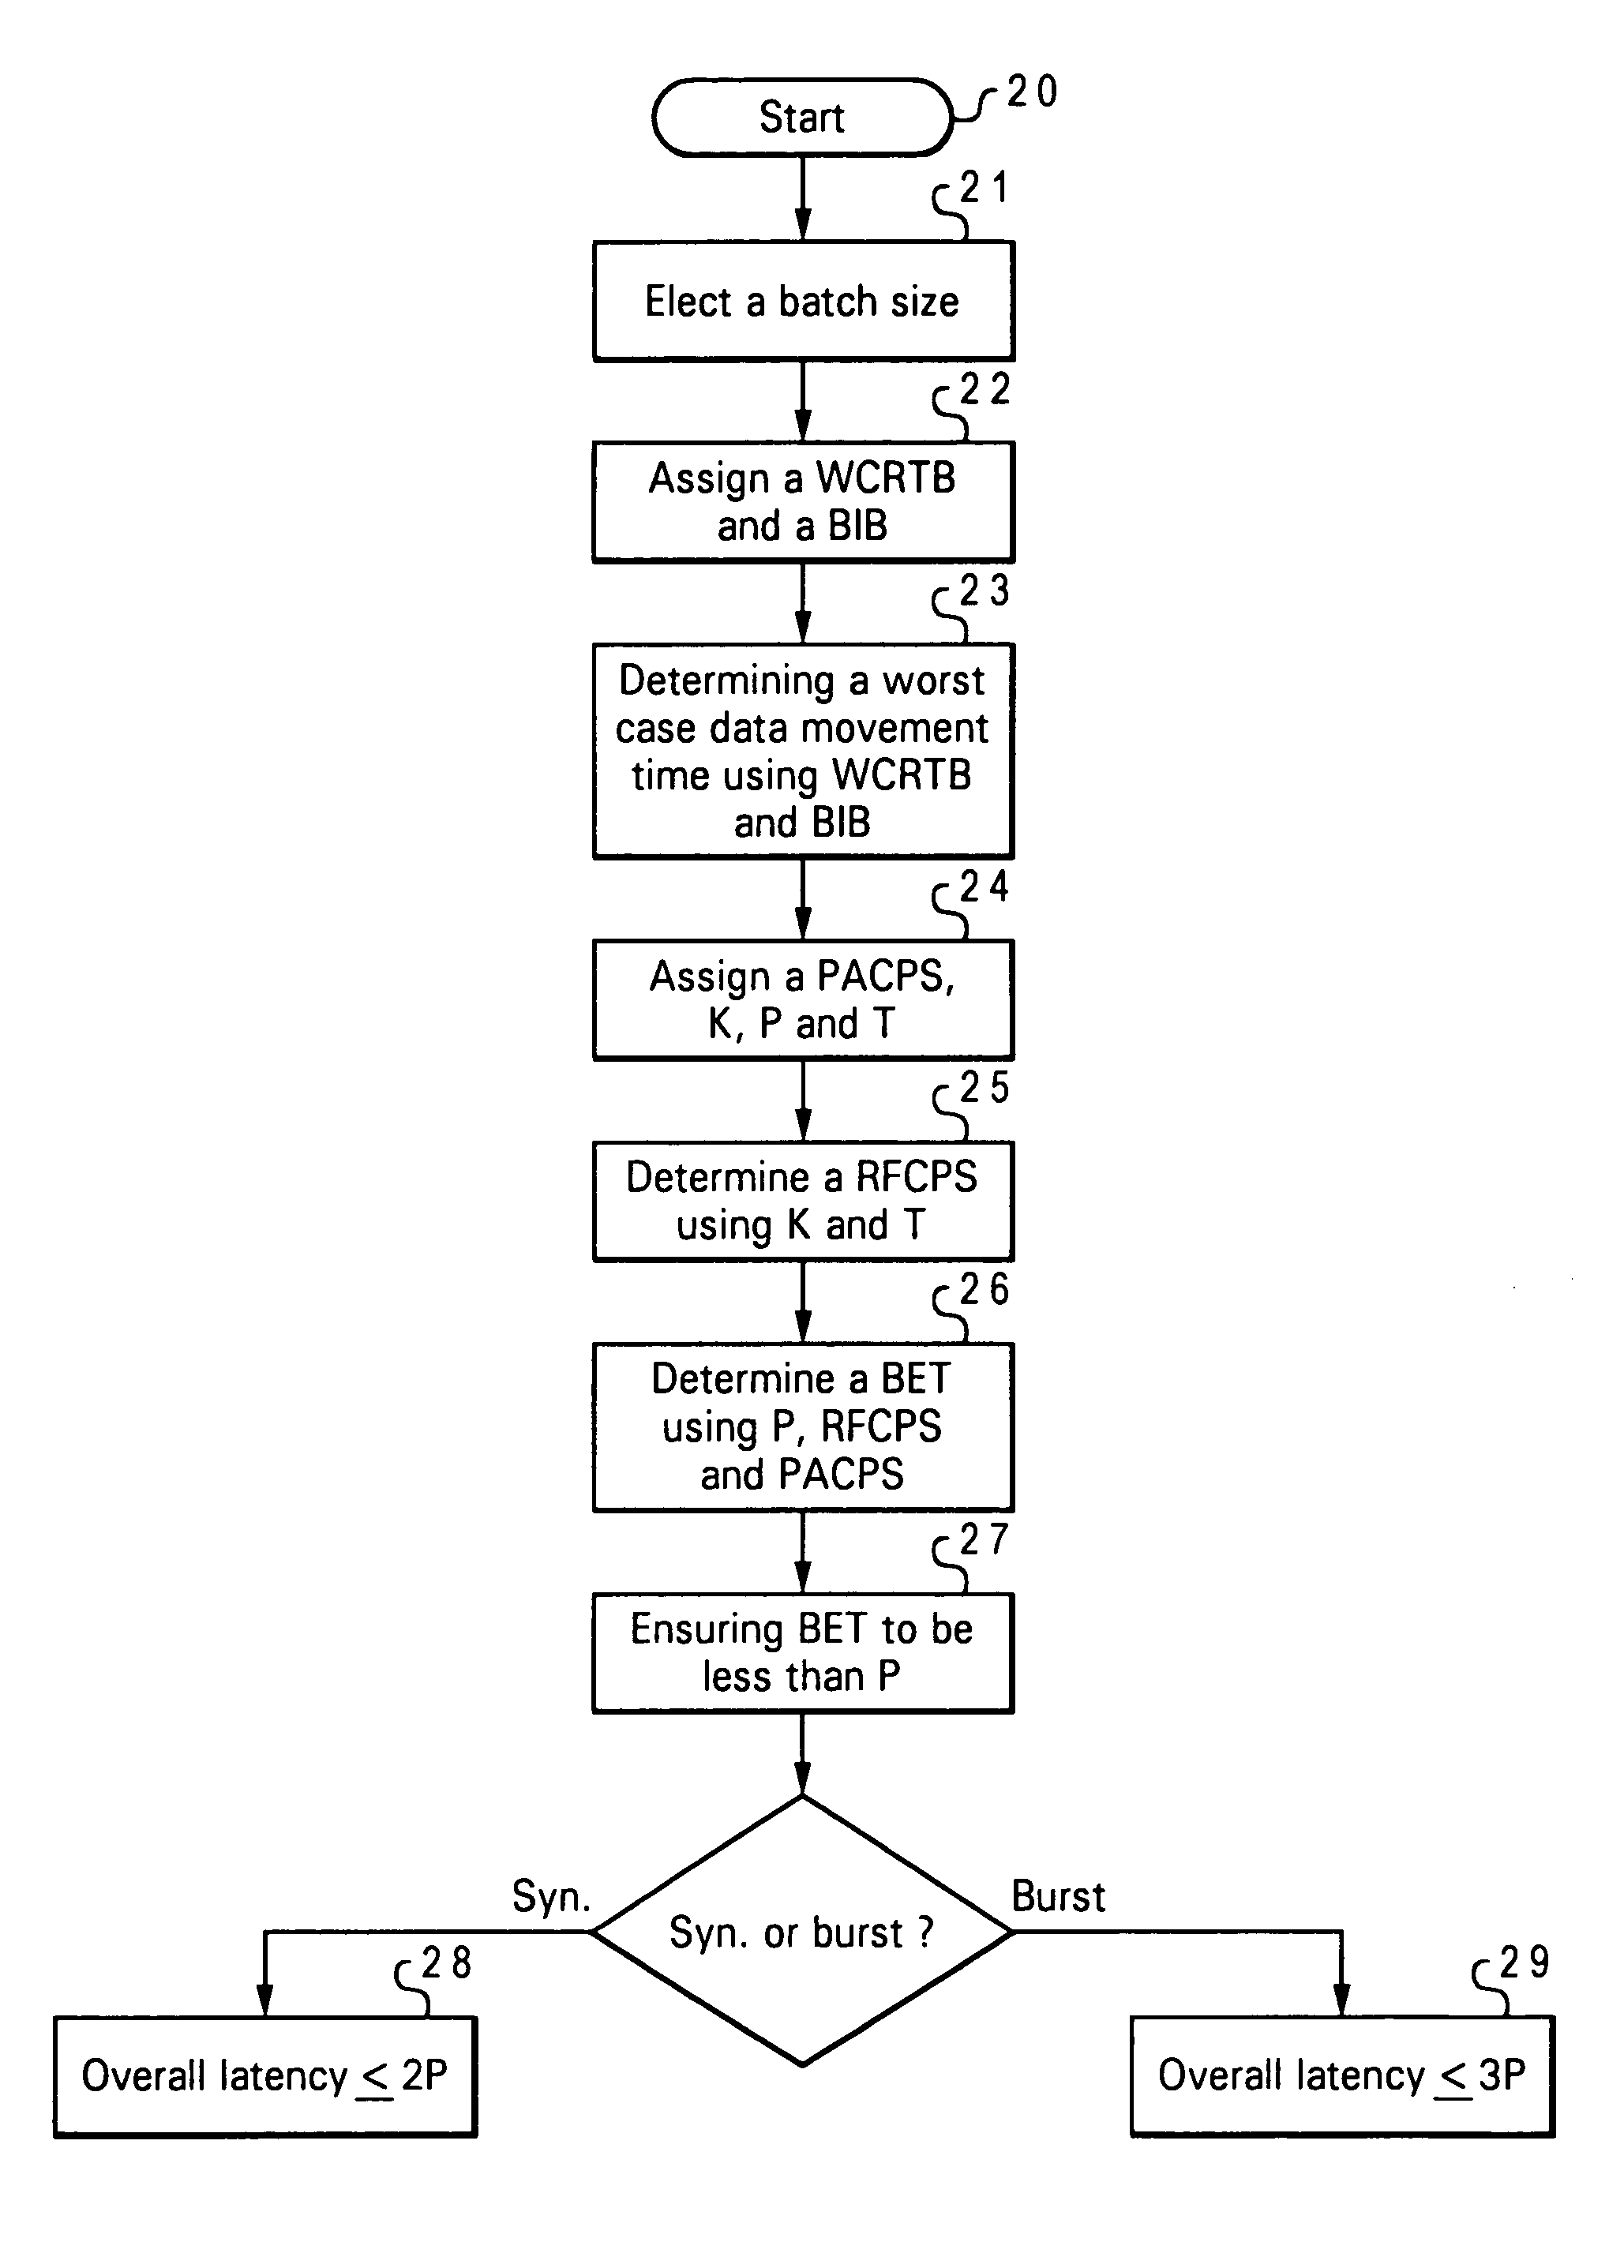 Method for providing bounded latency in a real-time data processing system